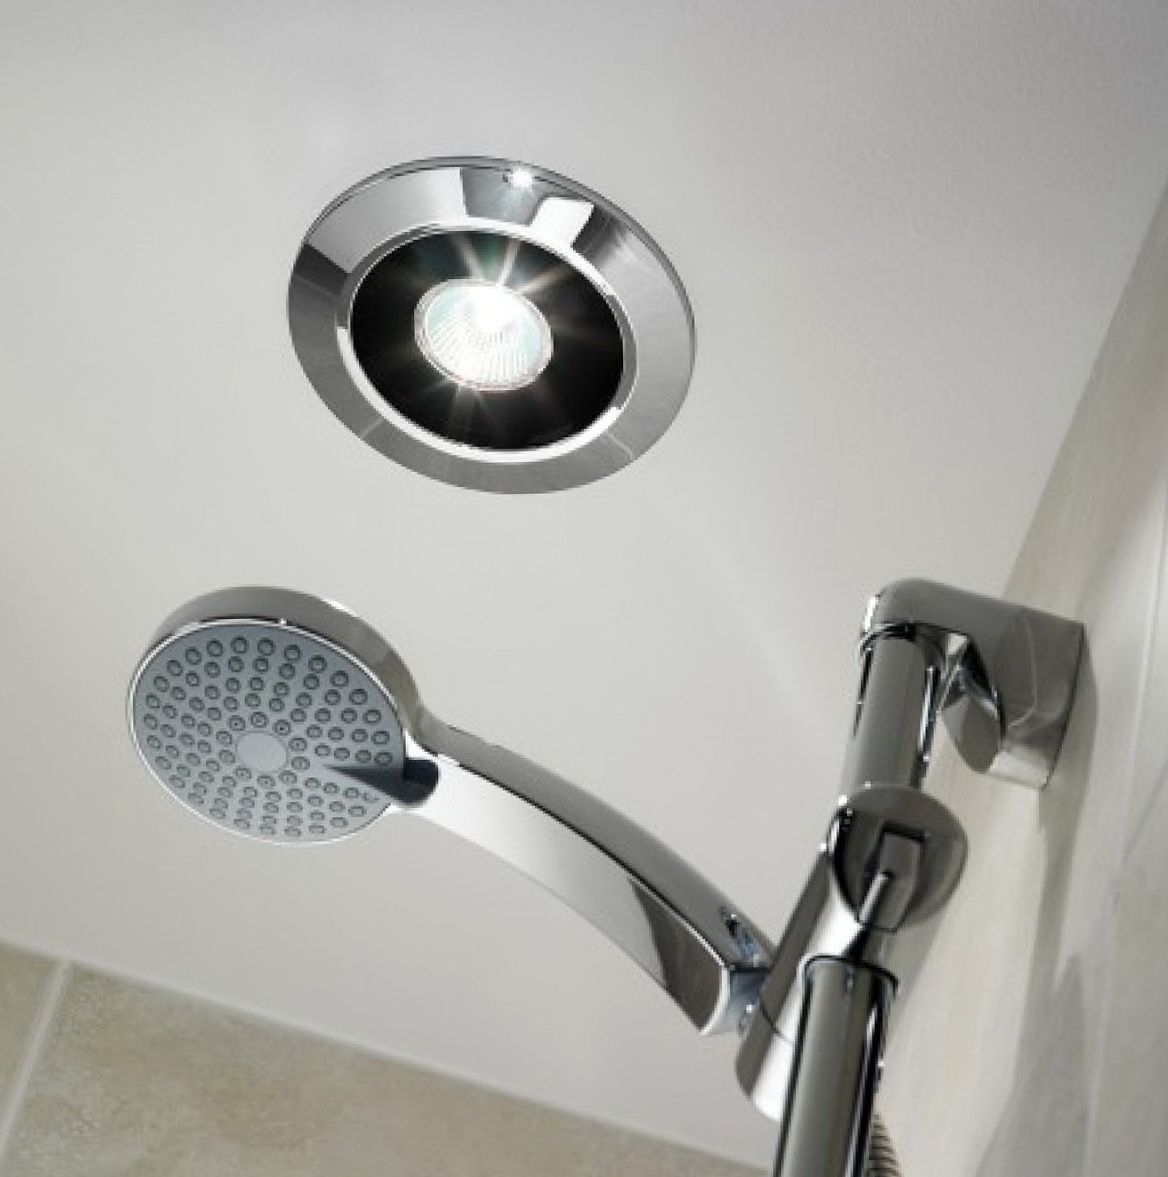 Best Quality Bathroom Extractor Fans Blogalways Bathroom with regard to dimensions 1168 X 1177